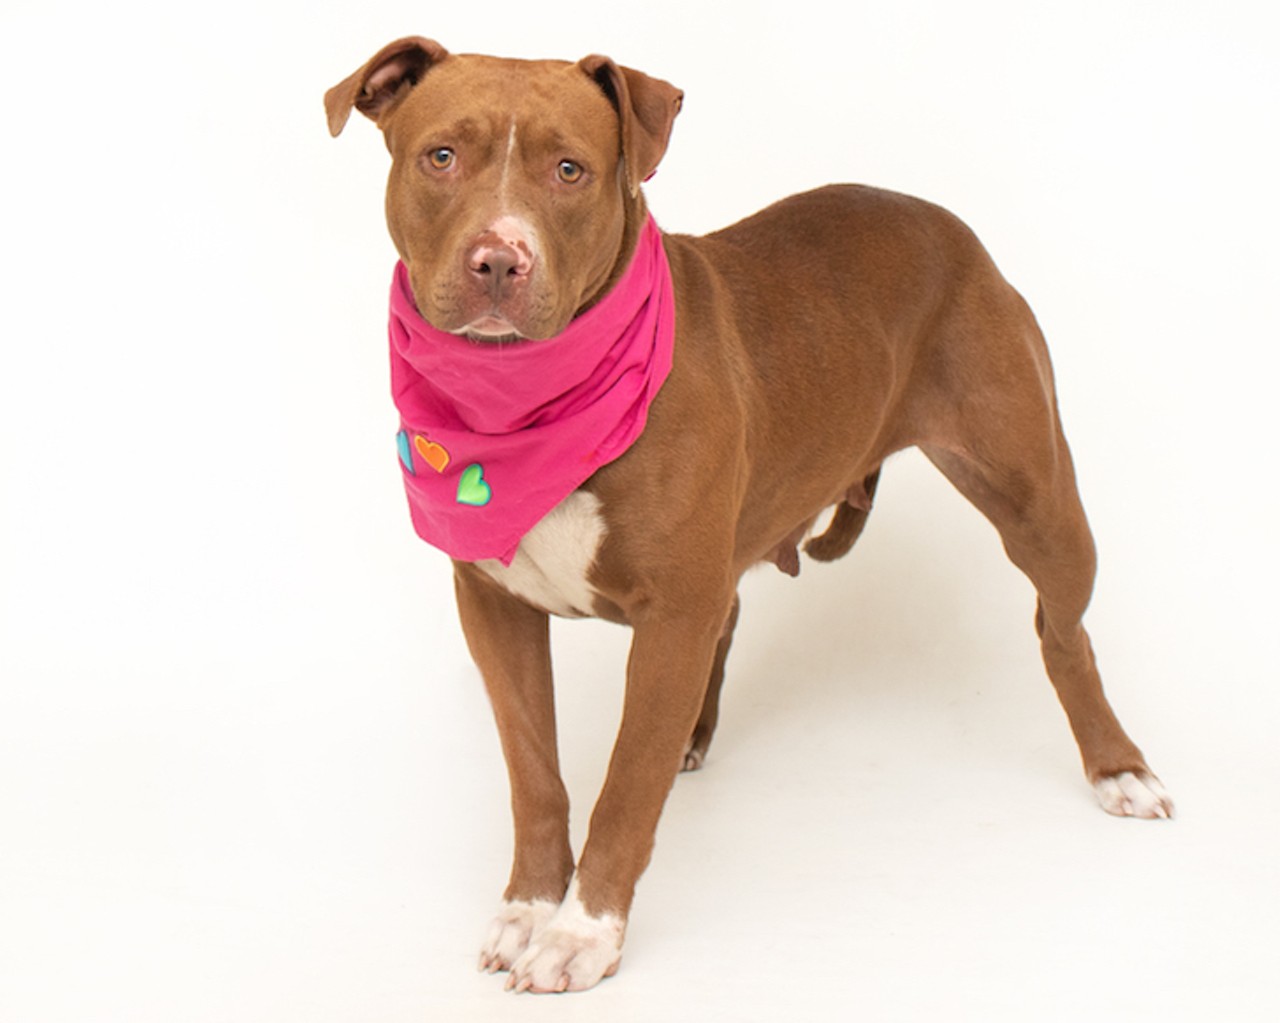 Spend your weekend with these adorable, adoptable Orange County dogs